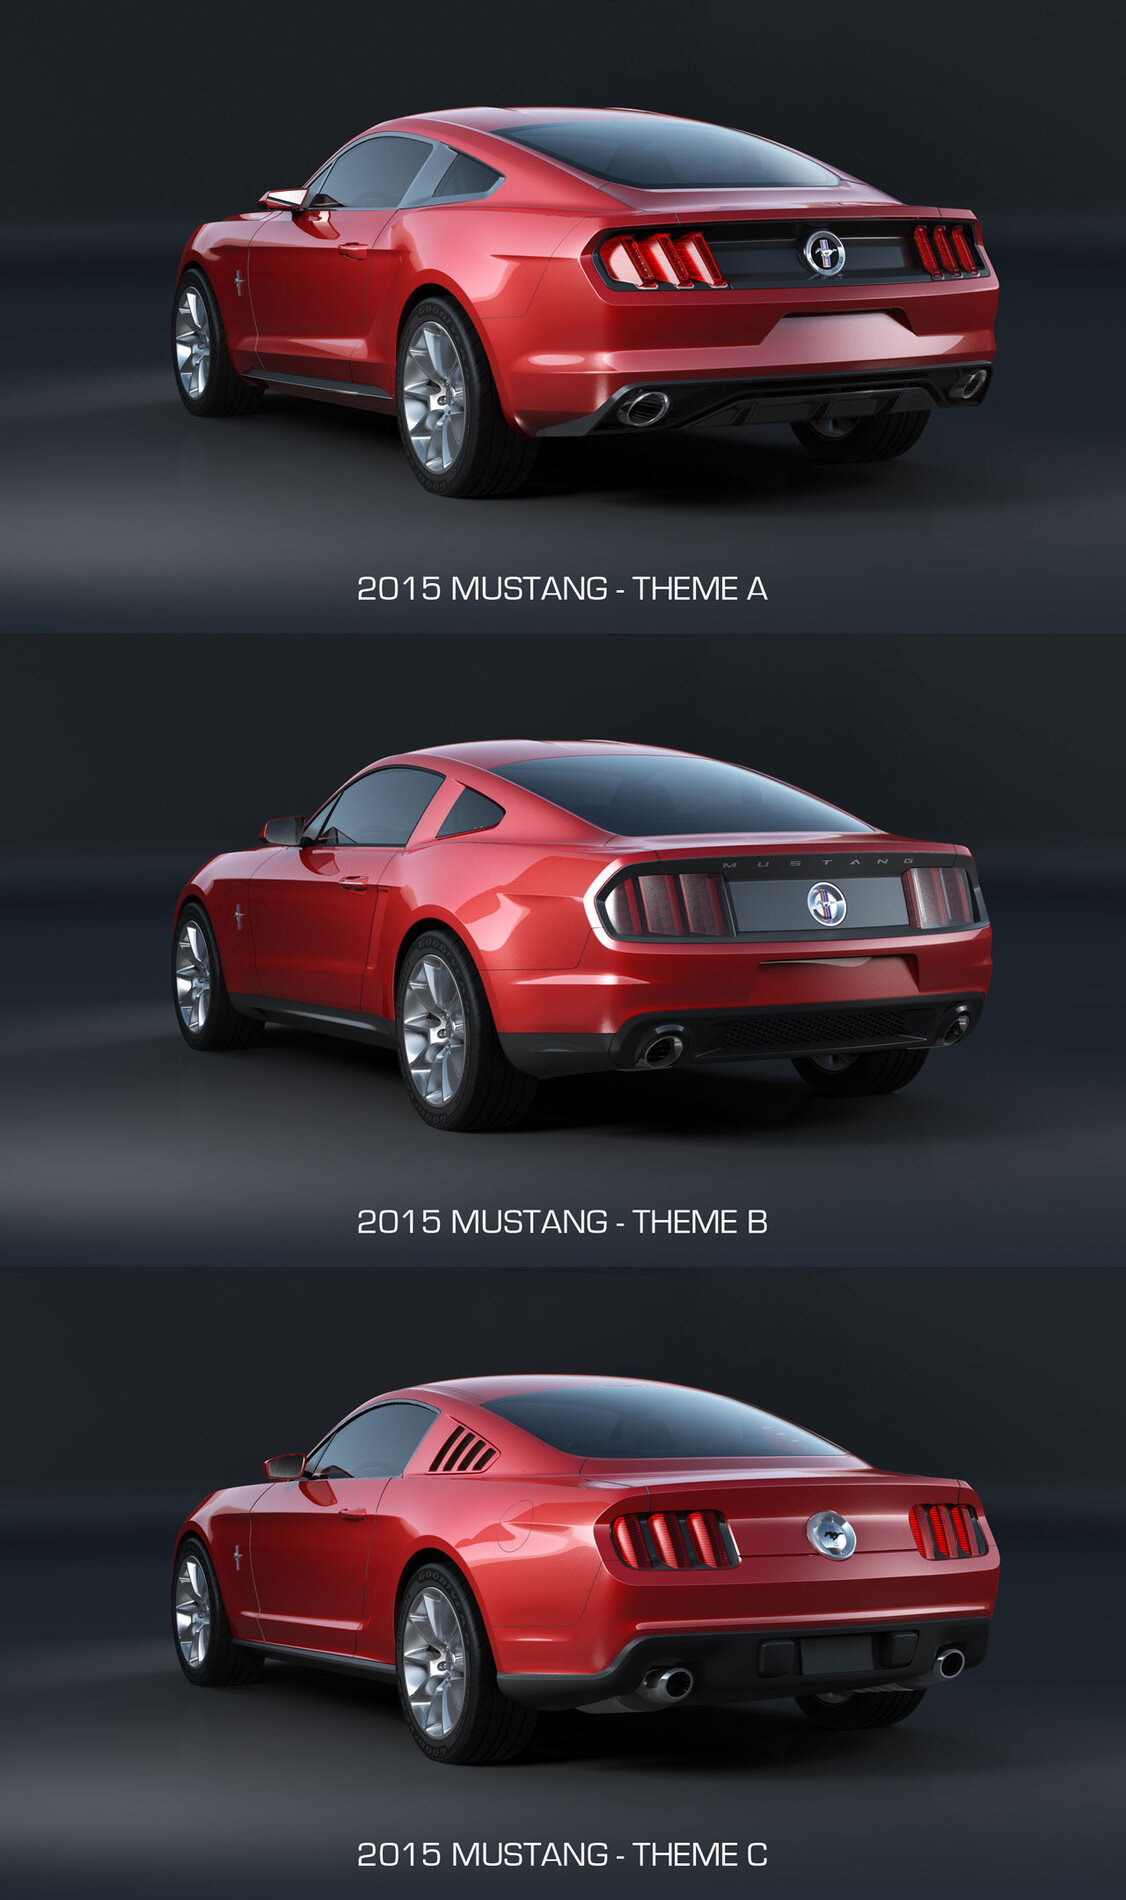 S650 Mustang S650 2023 Mustang (7th Gen) Lead Designer Revealed 04-2015-Ford-Mustang-Design-Theme-Comparison-Rear-end (1)